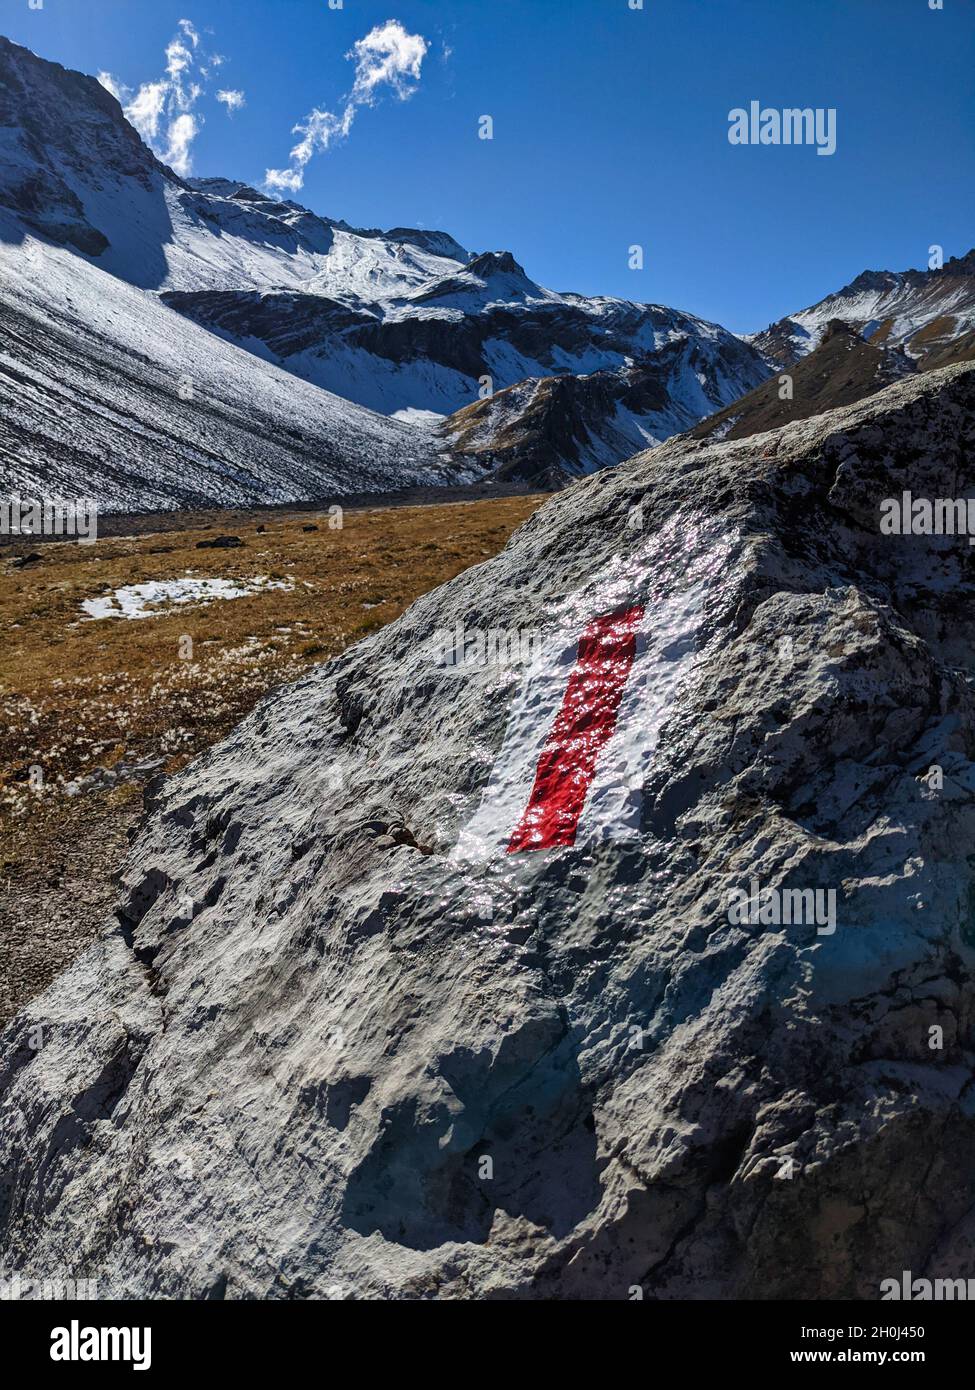 Mountain hiking trail.Hiking trails show red and white in the mountains of grisons near davos klosters. Hiking in nature Stock Photo